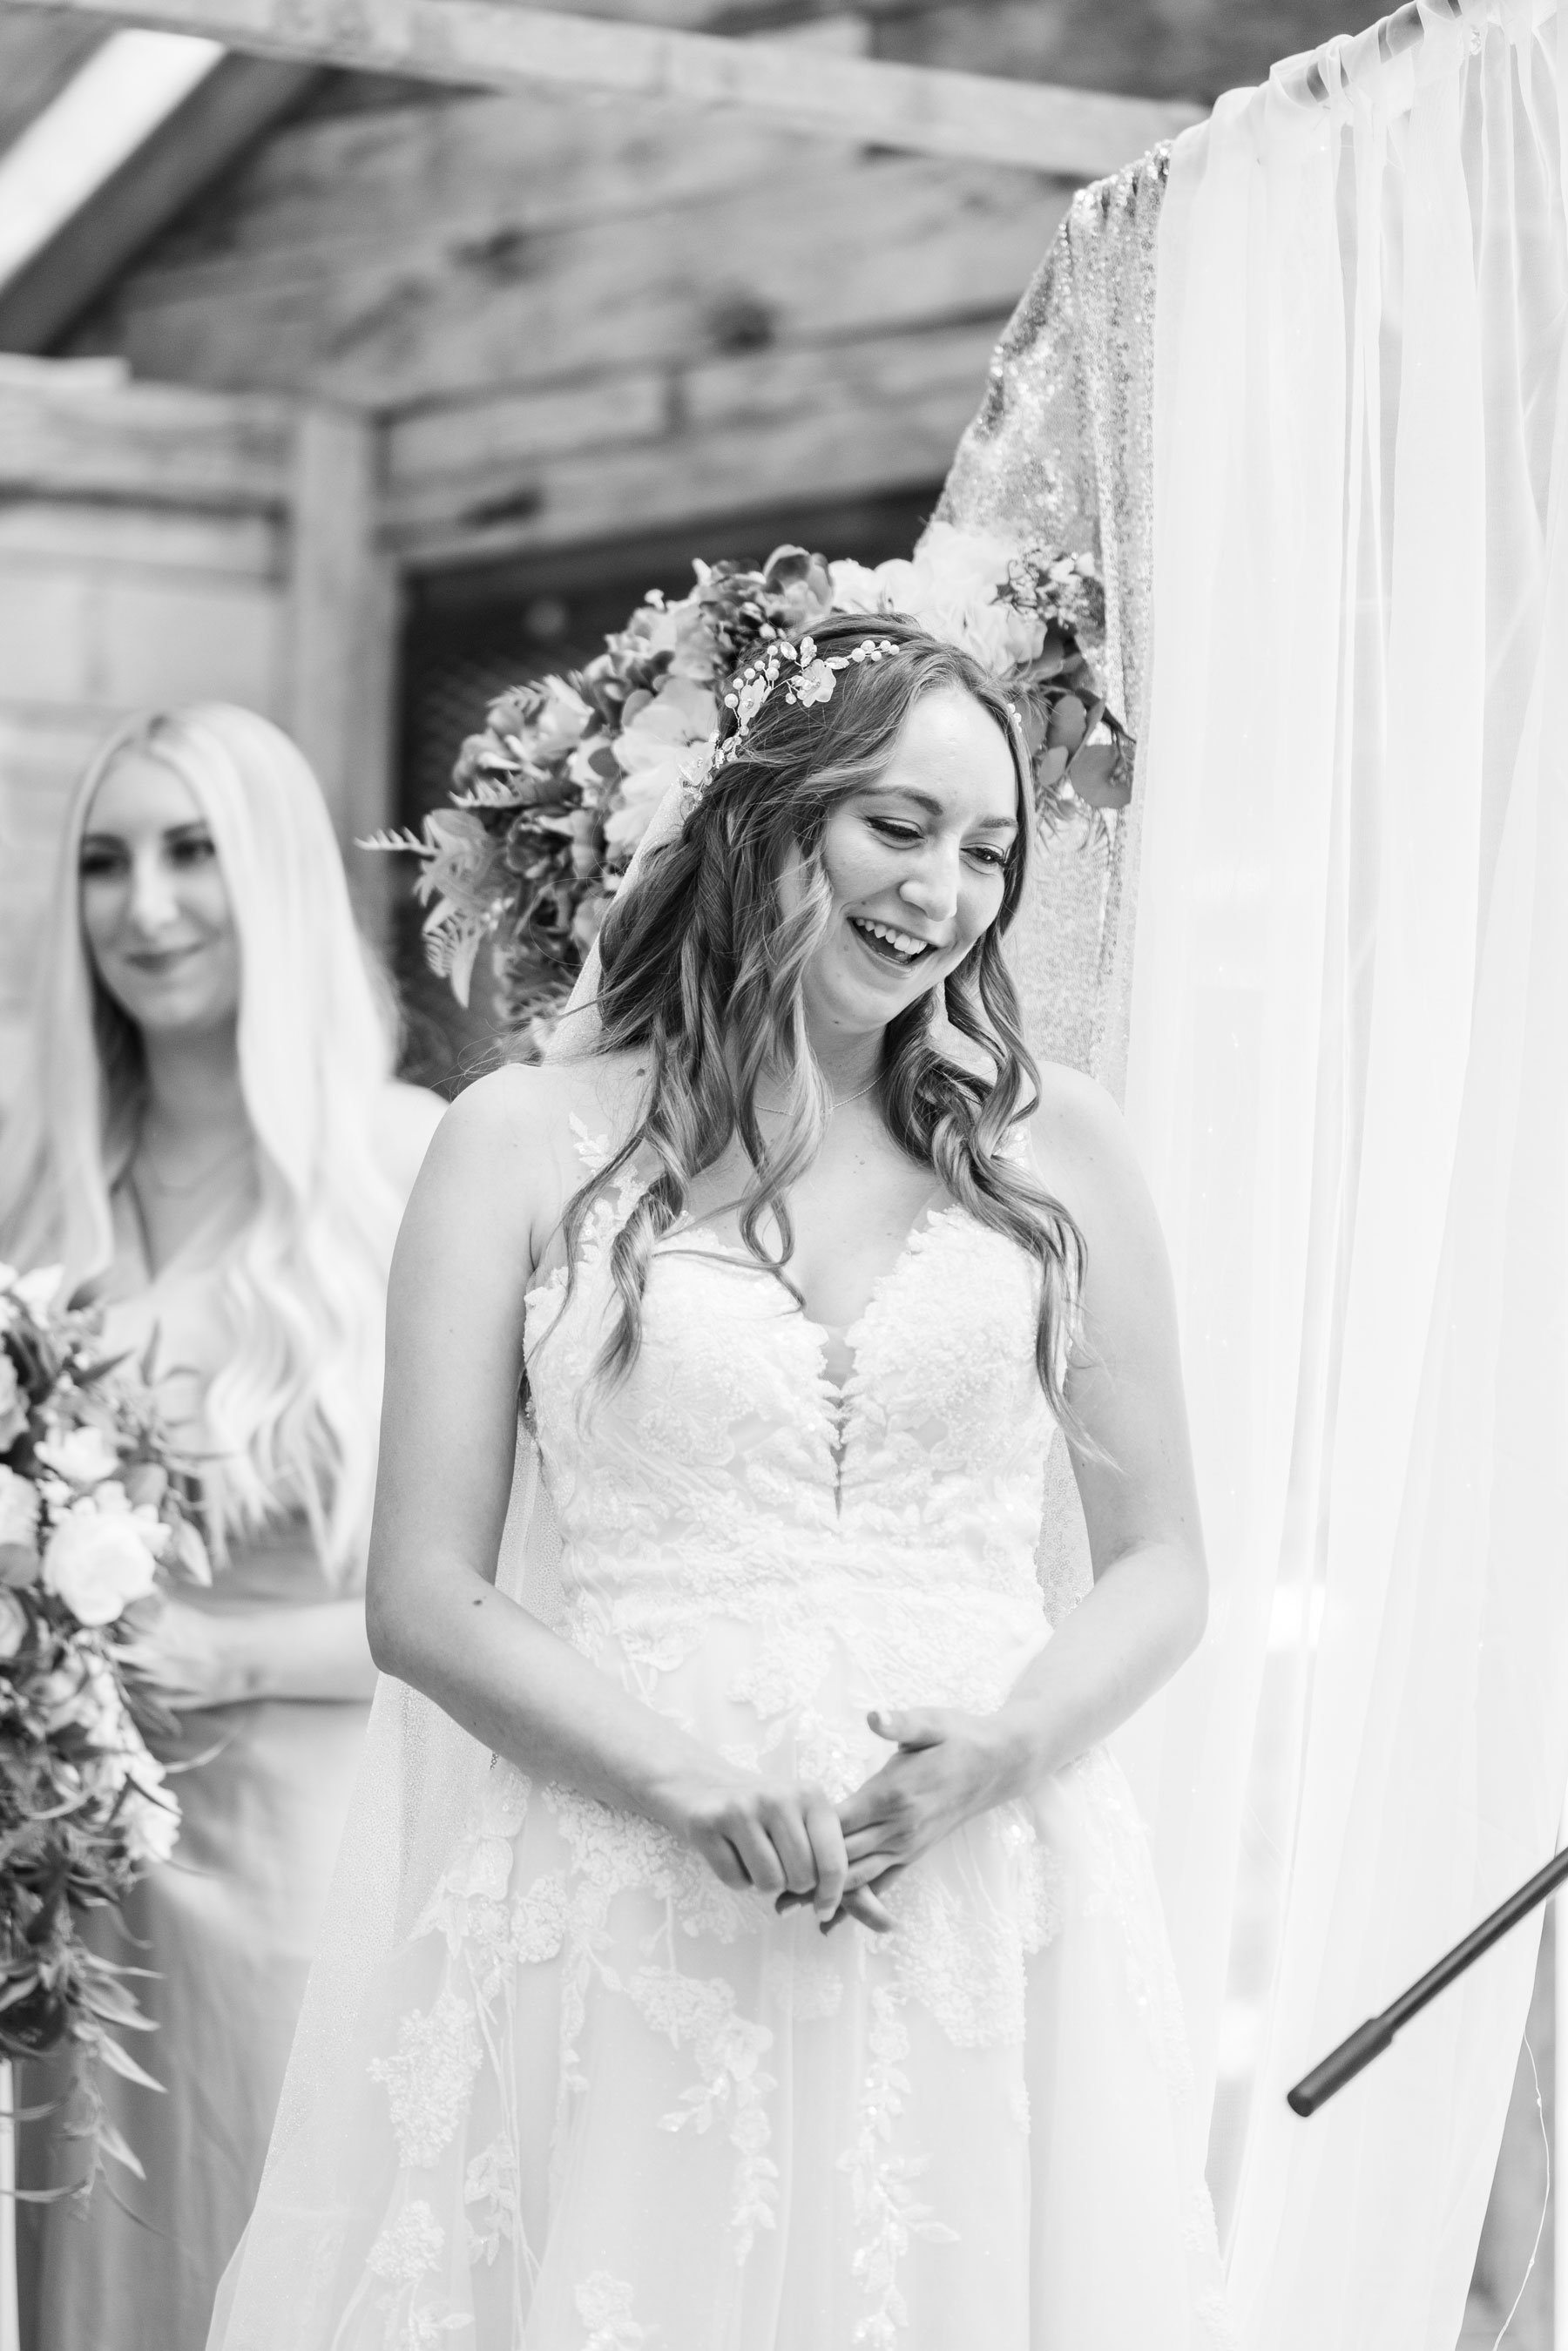  A beautiful bride with a floral crown and sweetheart neckline wedding dress smiles as she gets to the end of the aisle by Savanna Richardson Photography in Utah County. bride at the altar floral wedding crown fitted wedding gown #savannarichardsonph